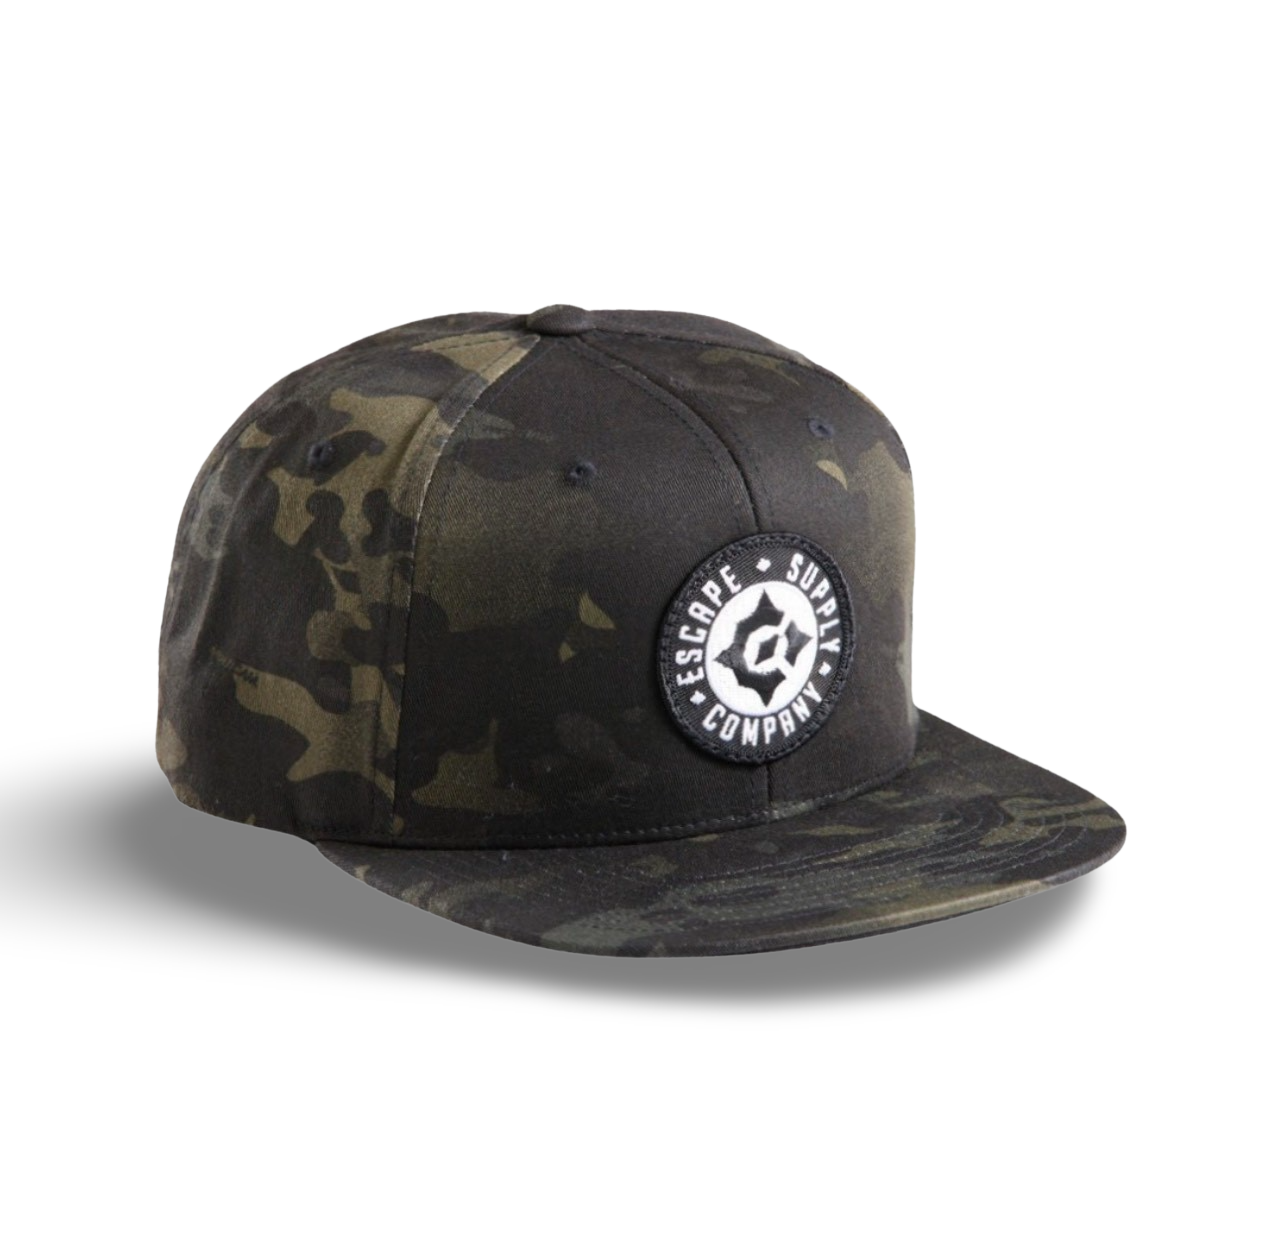 Compass Camouflage hat